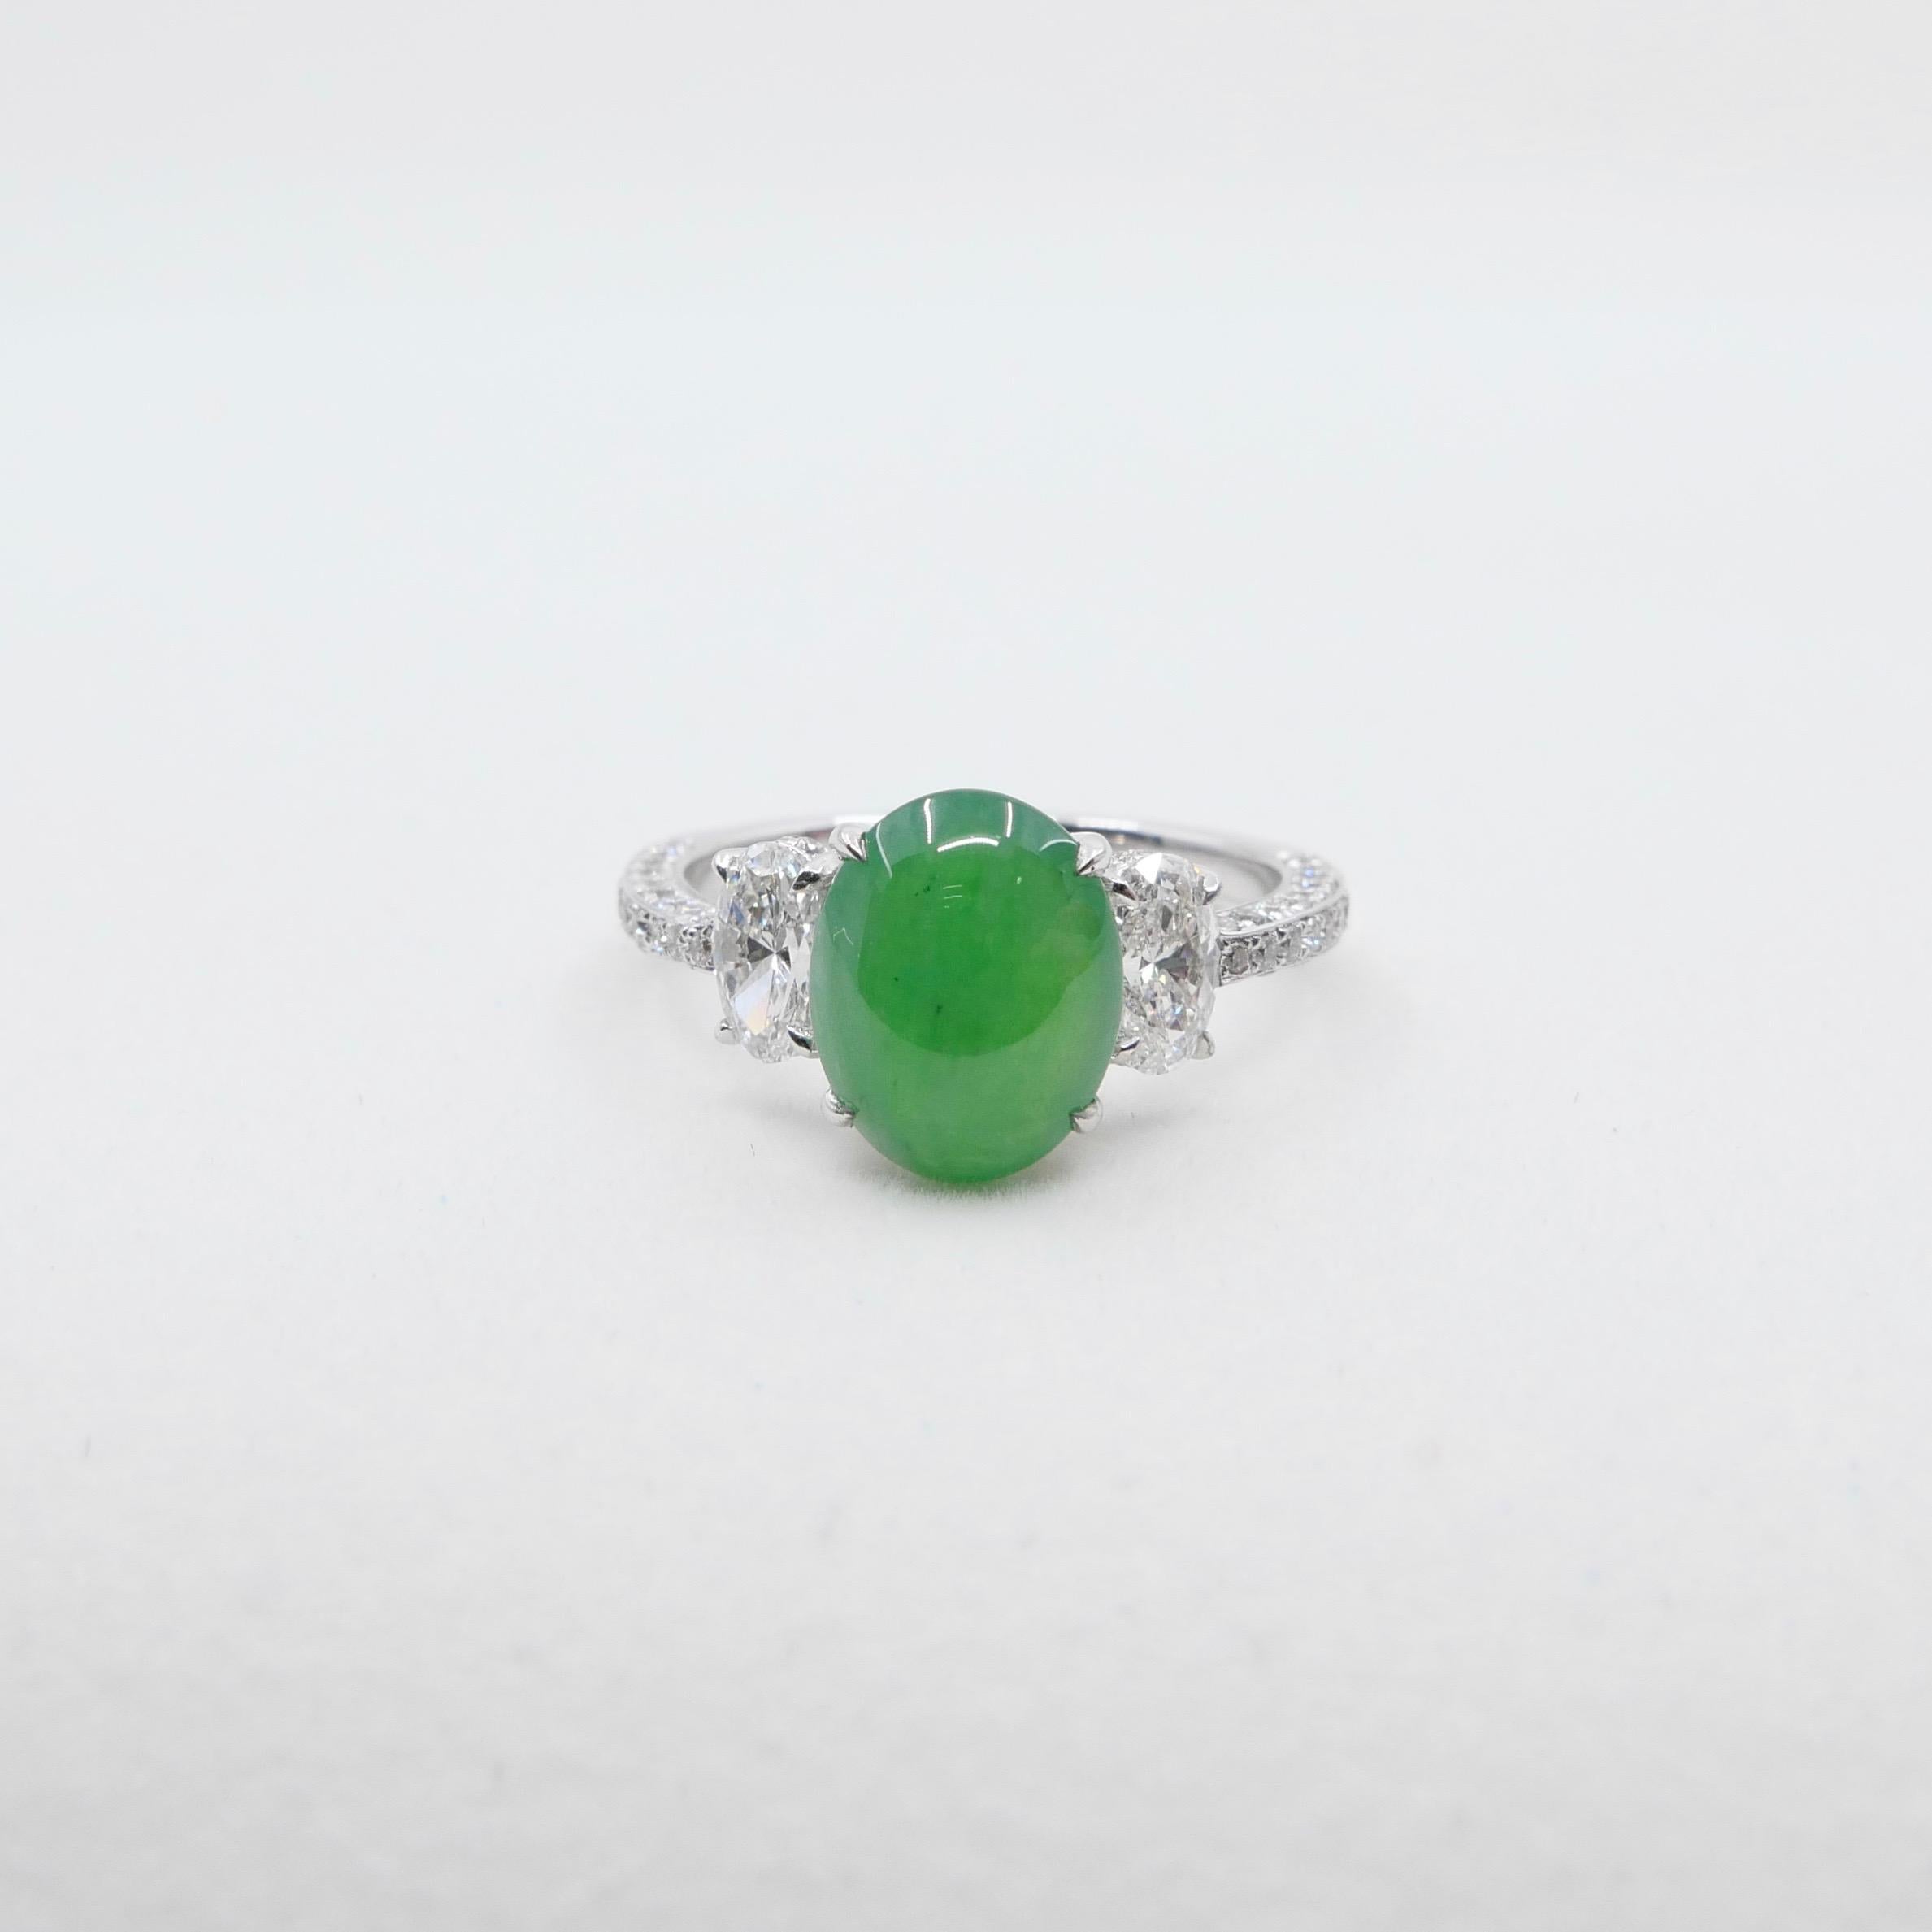 Certified 2.27 Cts Natural Jade & Oval Diamond Cocktail Ring, Apple Green Color For Sale 2